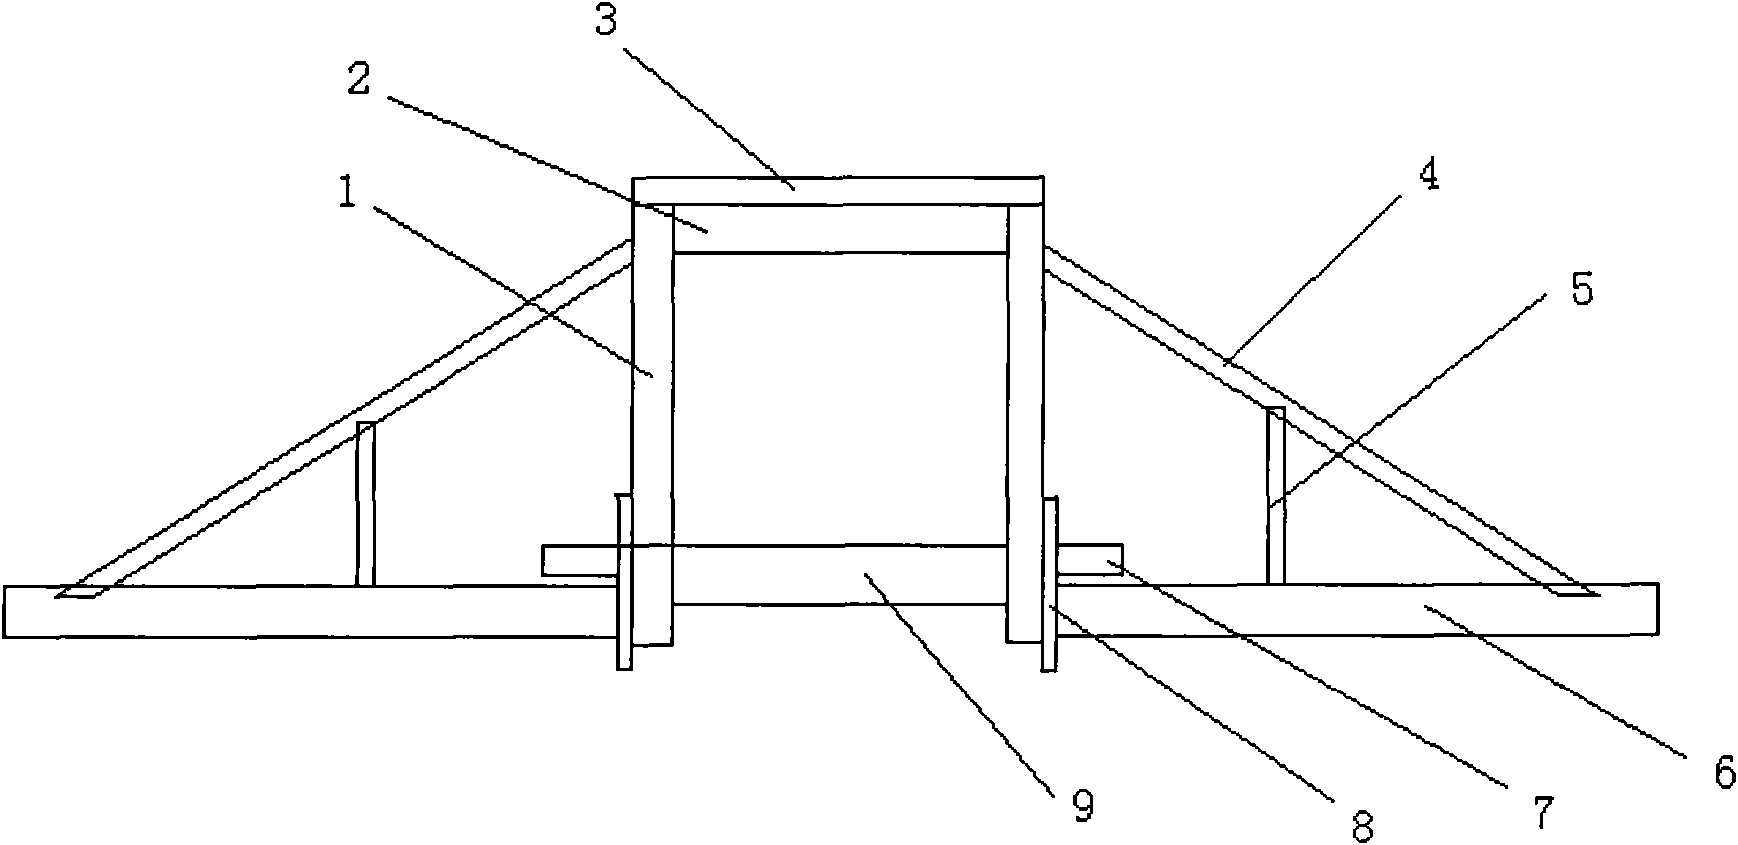 Supporting frame of wood roof